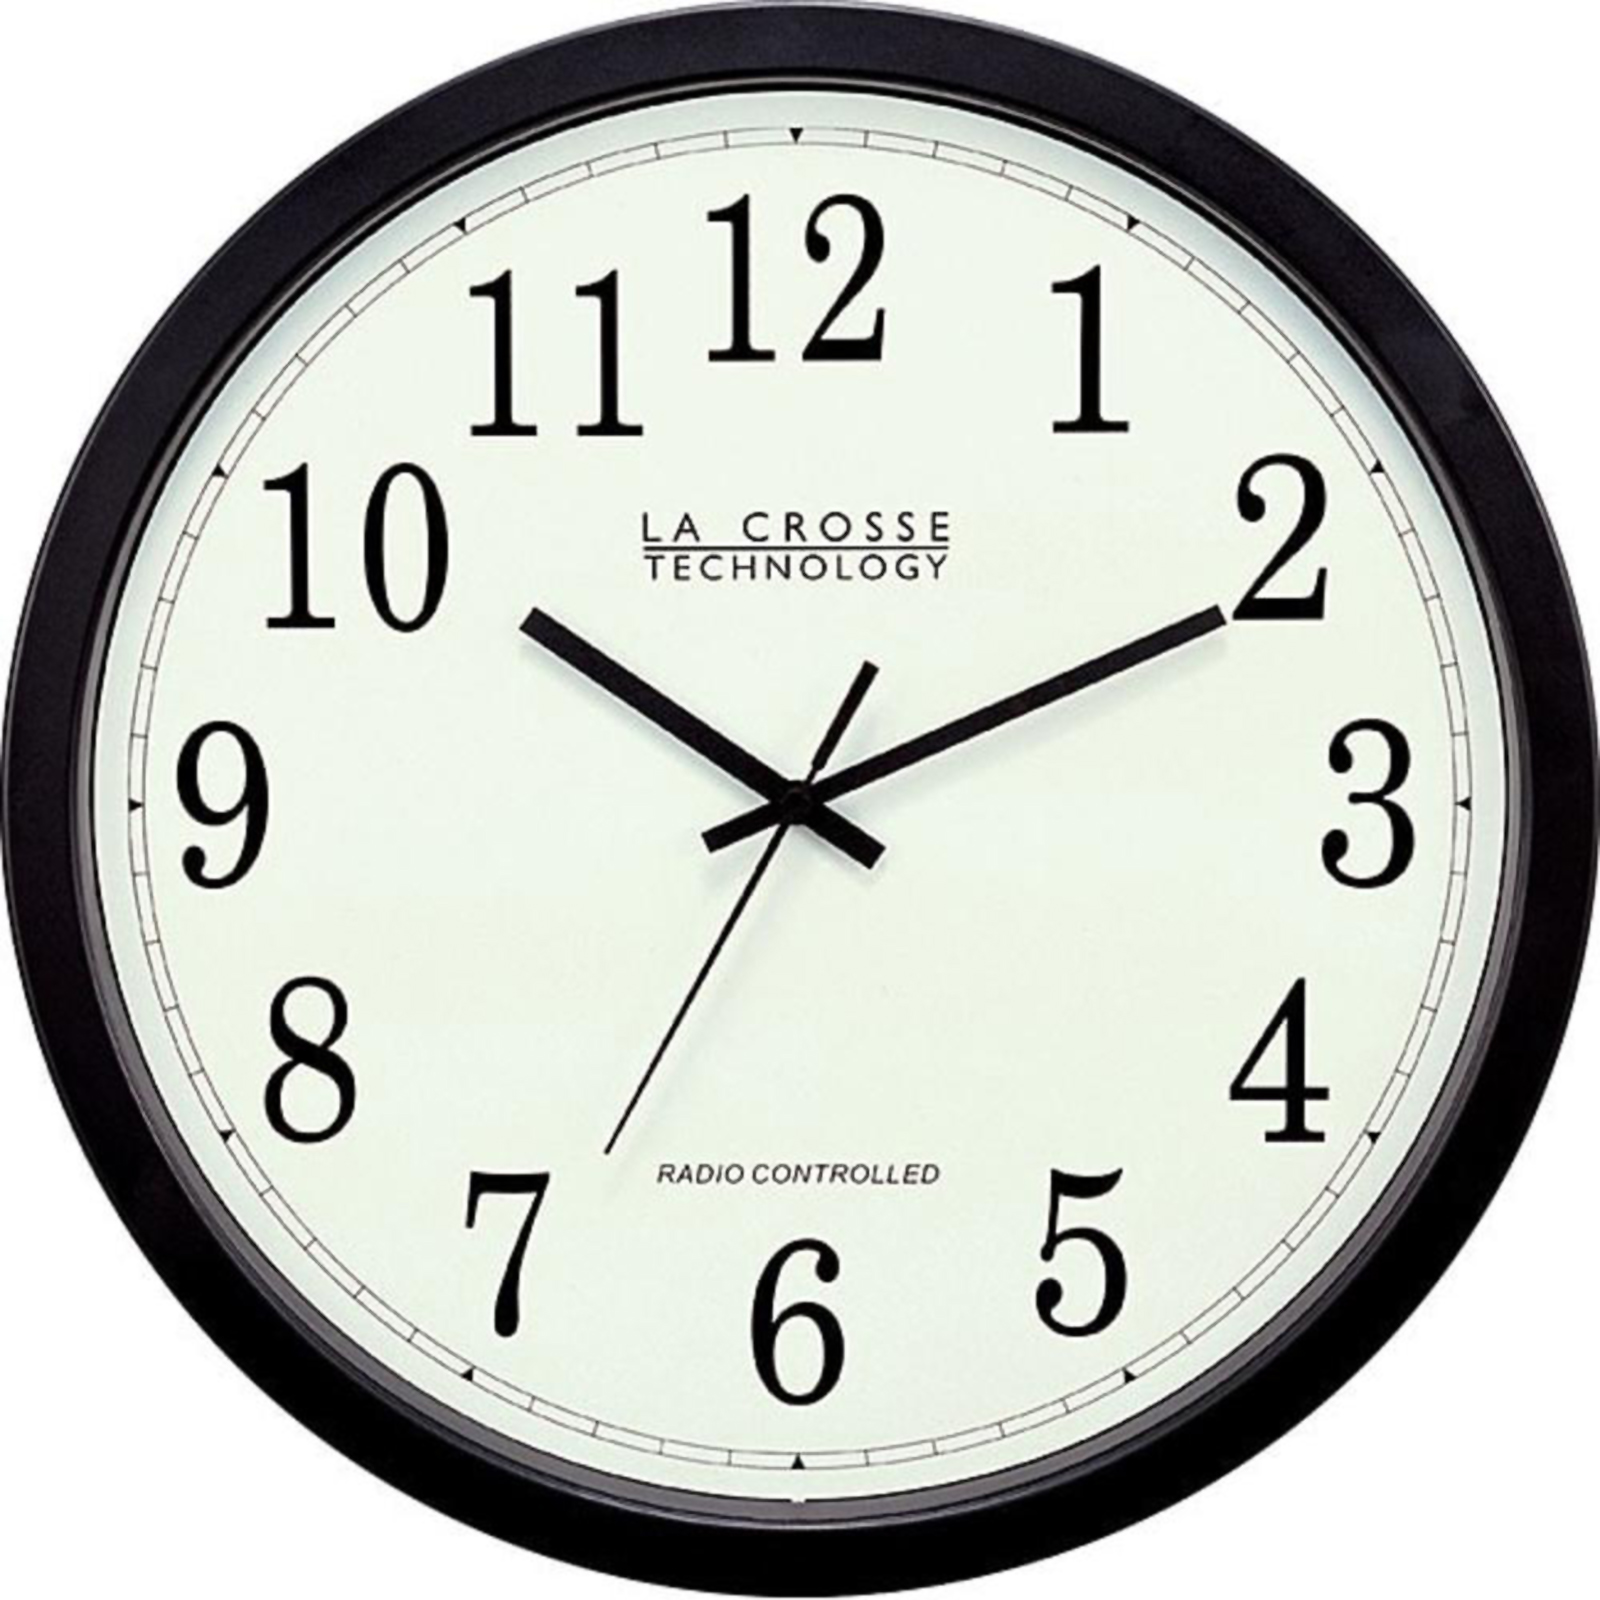 La Crosse Technology Radio-Controlled Atomic Wall Clock with 4 Time Zone Settings - Black